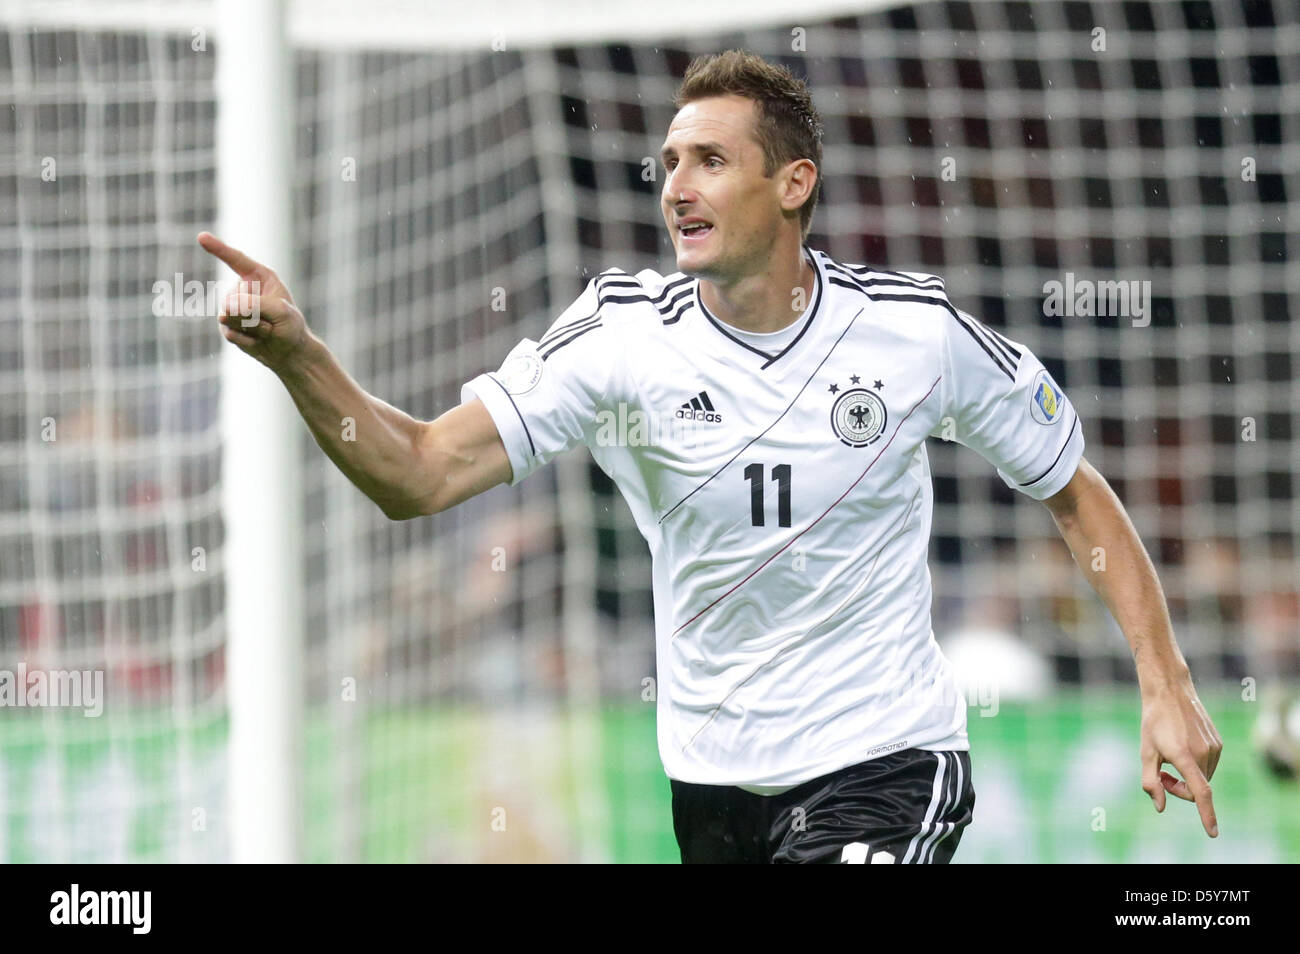 Germany's Miroslav Klose celebrates after scoring the first goal during the FIFA World Cup 2014 qualifying soccer match between Germany and Sweden at Olympic stadium in Berlin, Germany, 16 October 2012. Photo: Michael Kappeler/dpa  +++(c) dpa - Bildfunk+++ Stock Photo